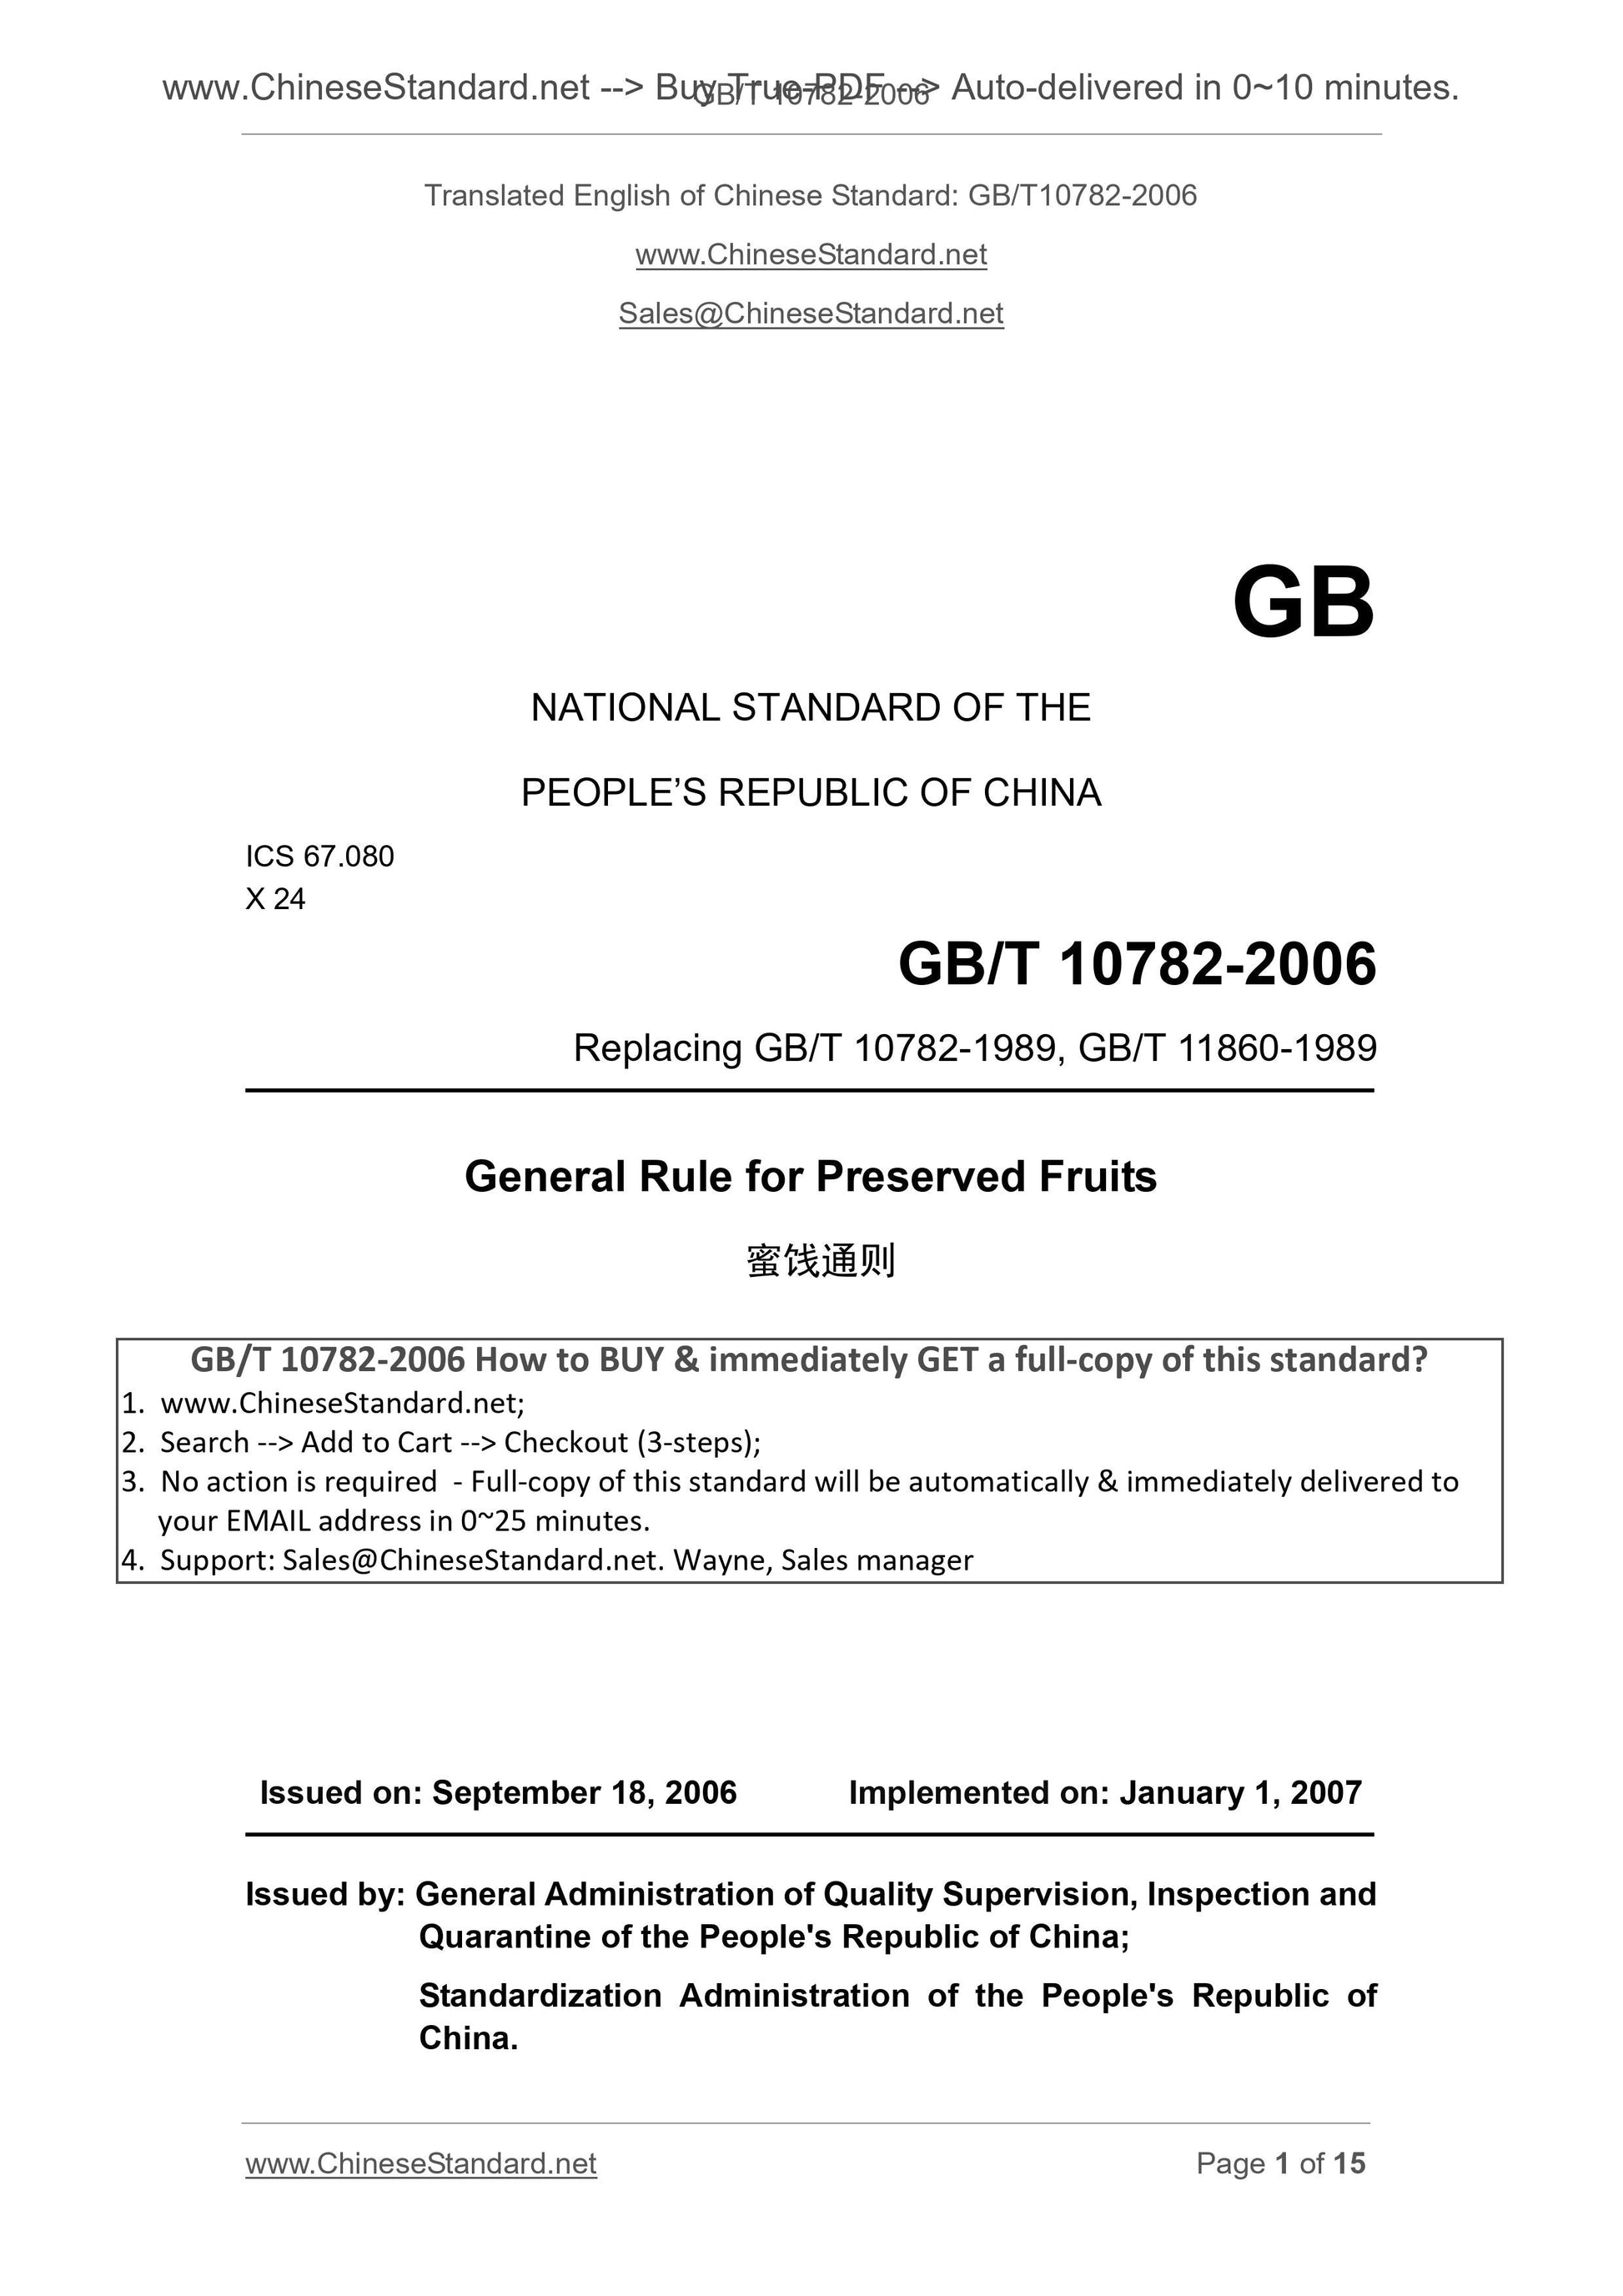 GB/T 10782-2006 Page 1